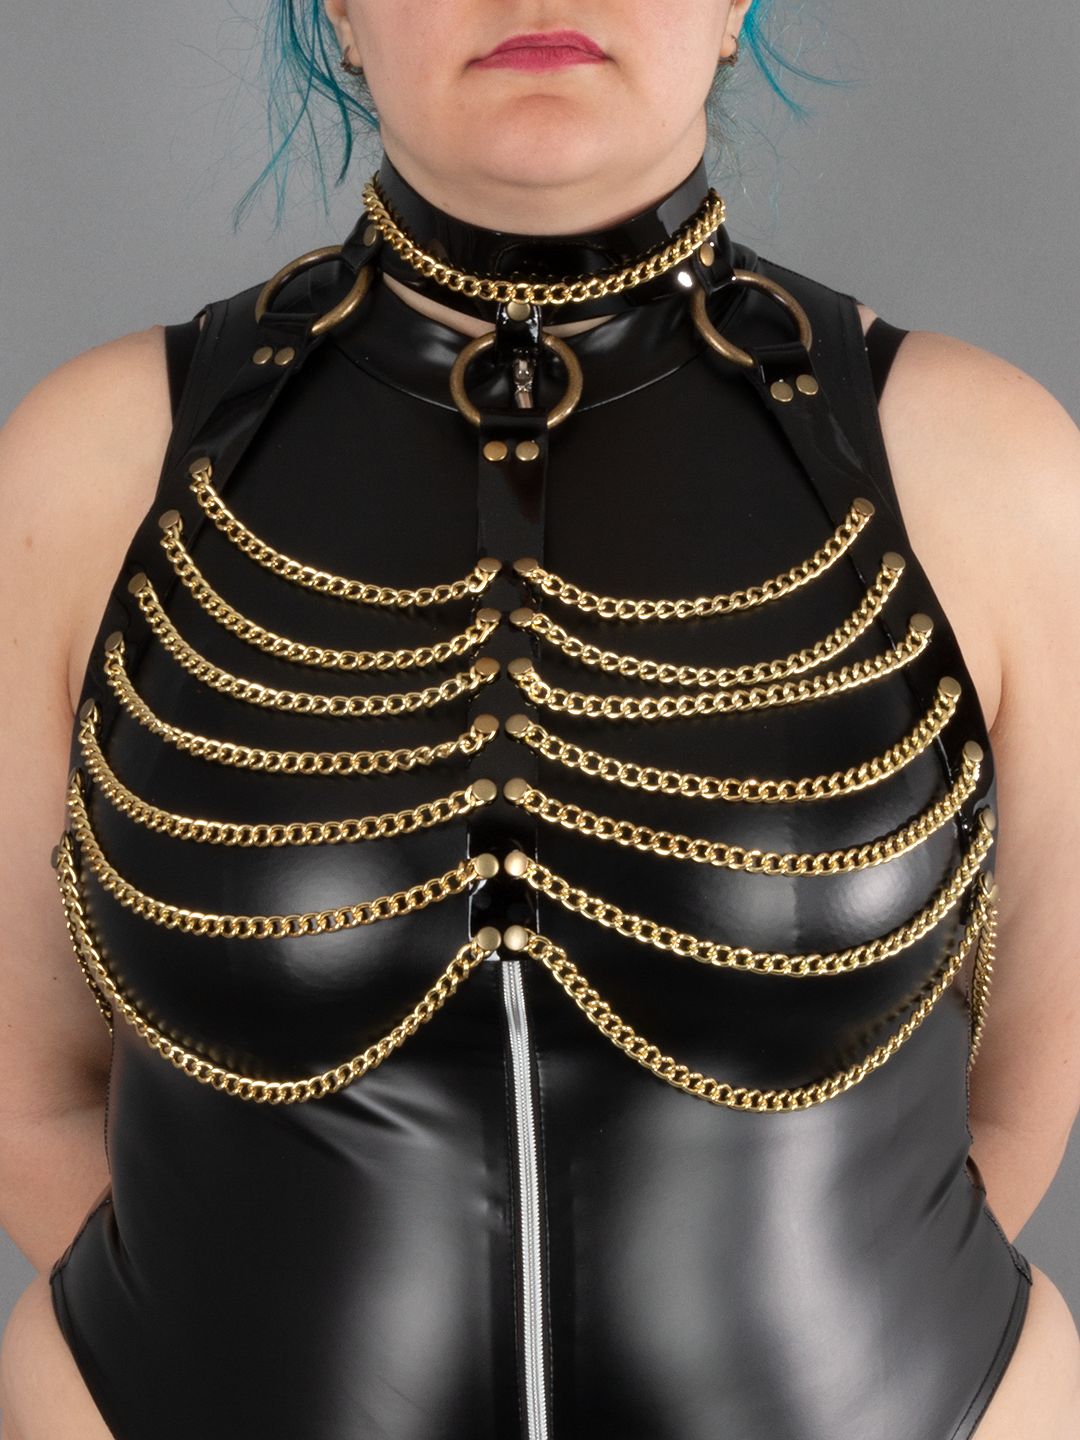 Leather Ribcage Harness